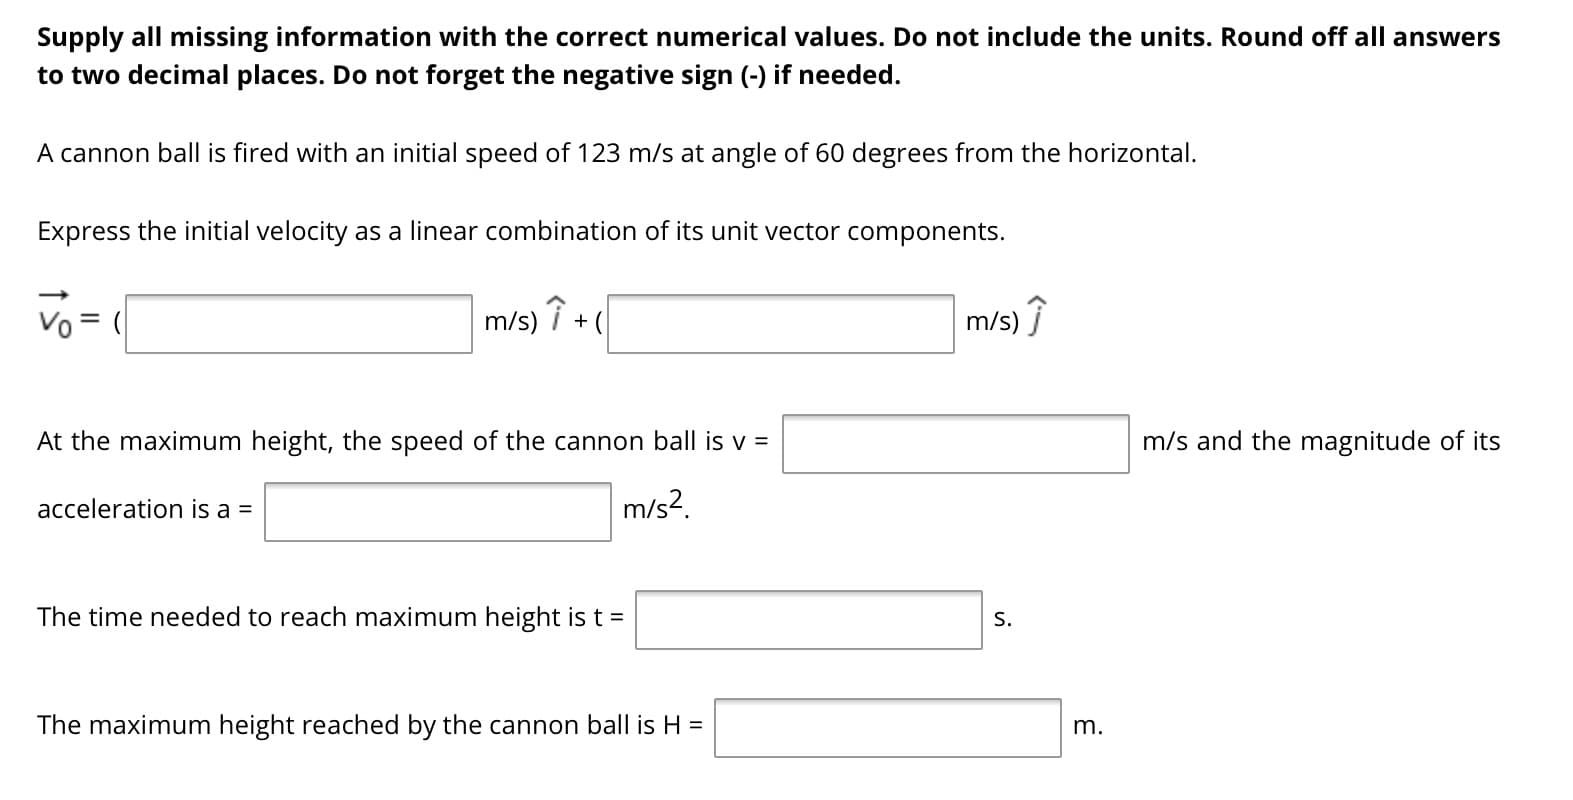 Supply all missing information with the correct numerical values. Do not include the units. Round off all answers
to two decimal places. Do not forget the negative sign (-) if needed.
A cannon ball is fired with an initial speed of 123 m/s at angle of 60 degrees from the horizontal.
Express the initial velocity as a linear combination of its unit vector components.
Vo = (
m/s) ↑ +
m/s) î
At the maximum height, the speed of the cannon ball is v =
m/s and the magnitude of its
acceleration is a =
m/s?.
The time needed to reach maximum height is t =
S.
The maximum height reached by the cannon ball is H =
m.
